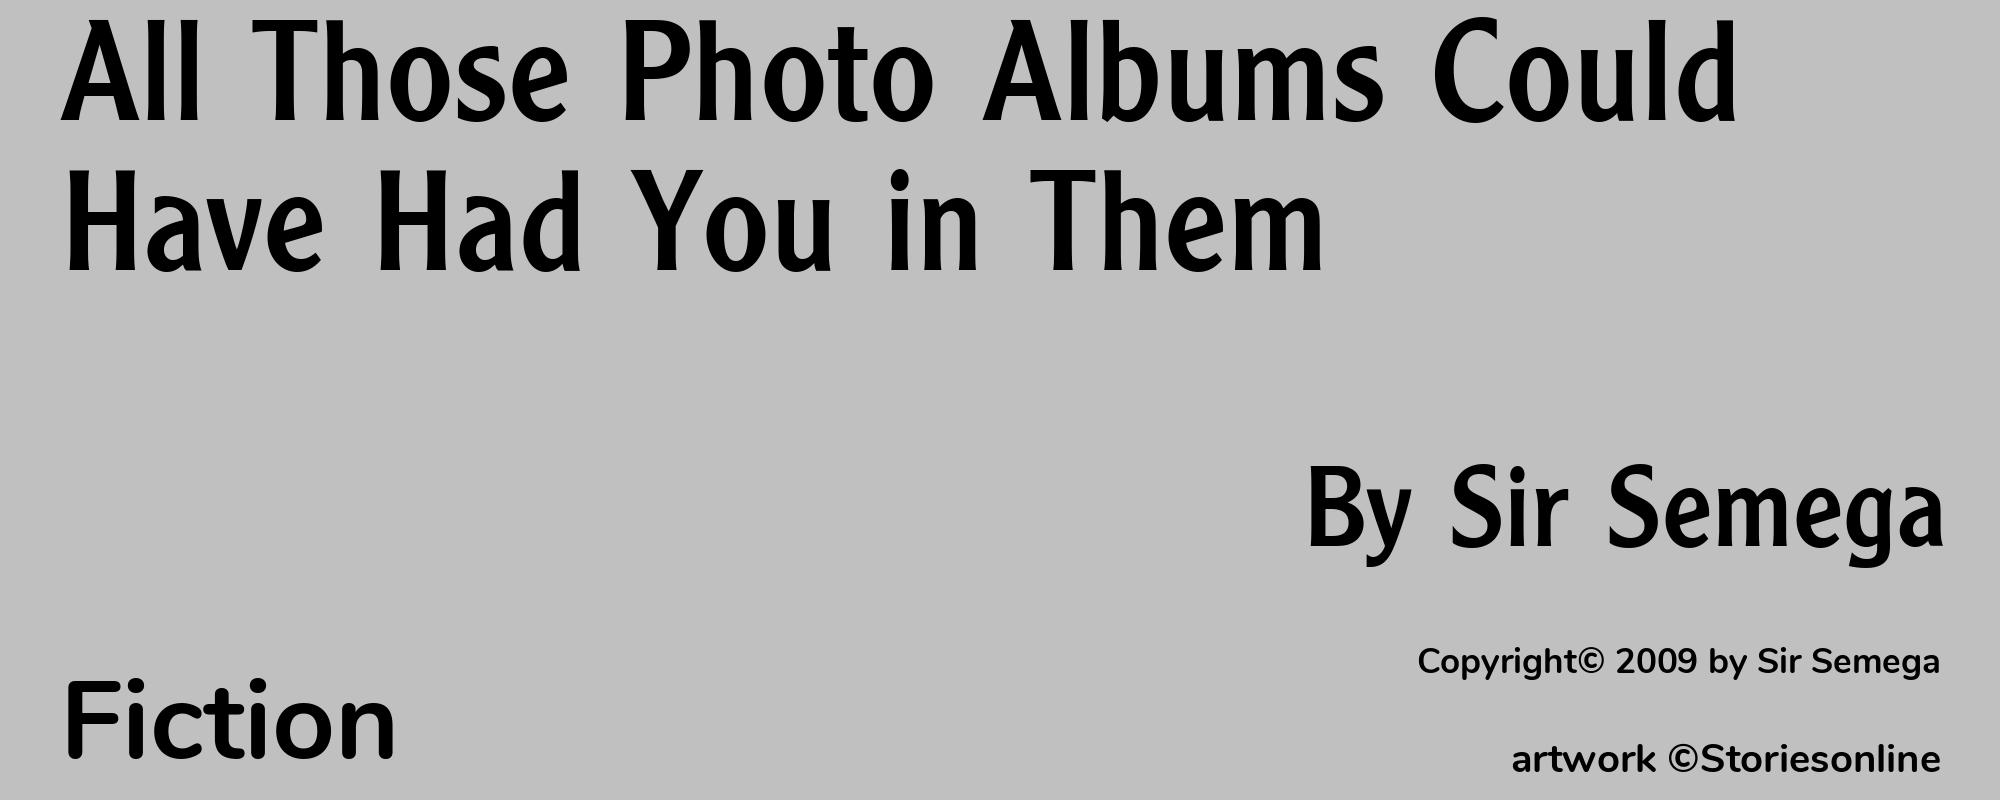 All Those Photo Albums Could Have Had You in Them - Cover